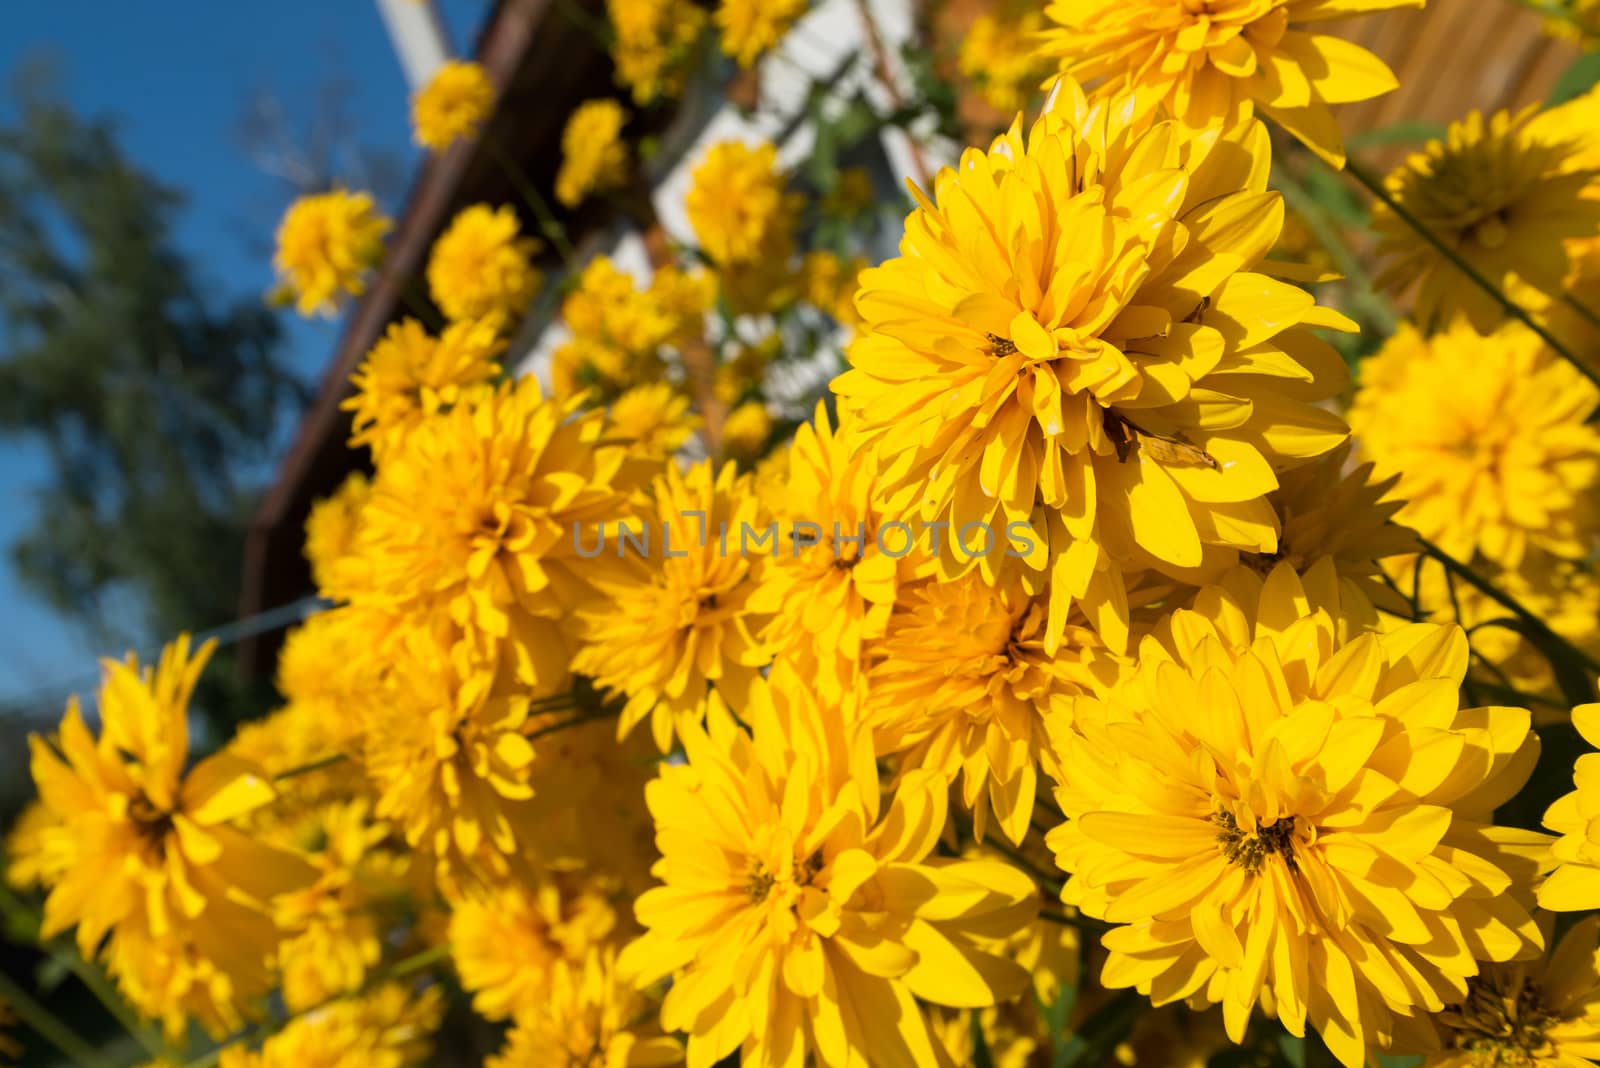 Yellow flowers in front of a village house